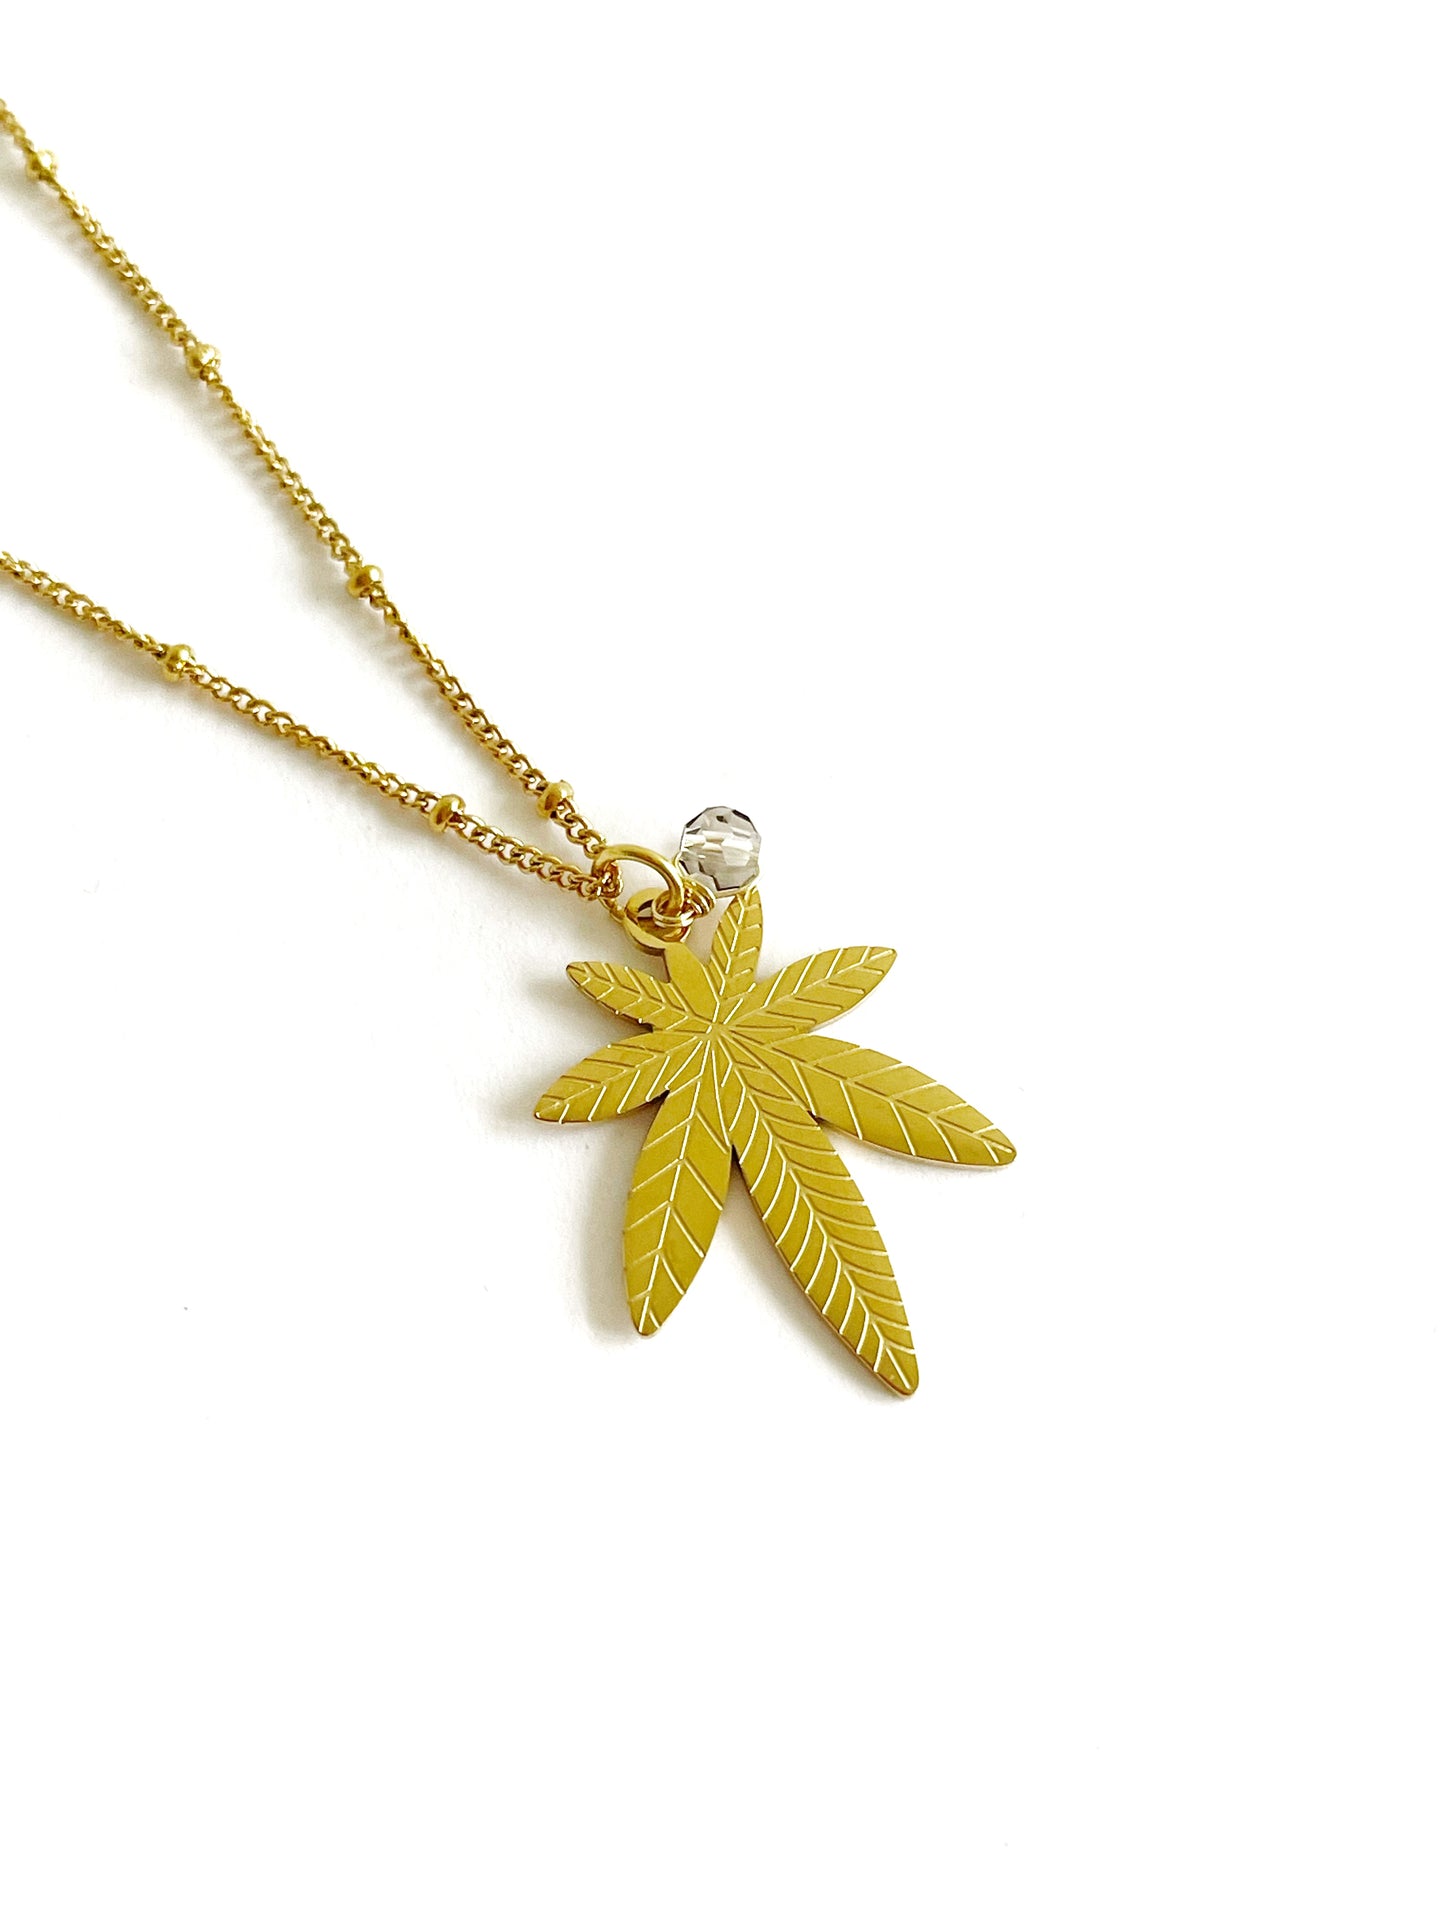 420 Gold Necklace